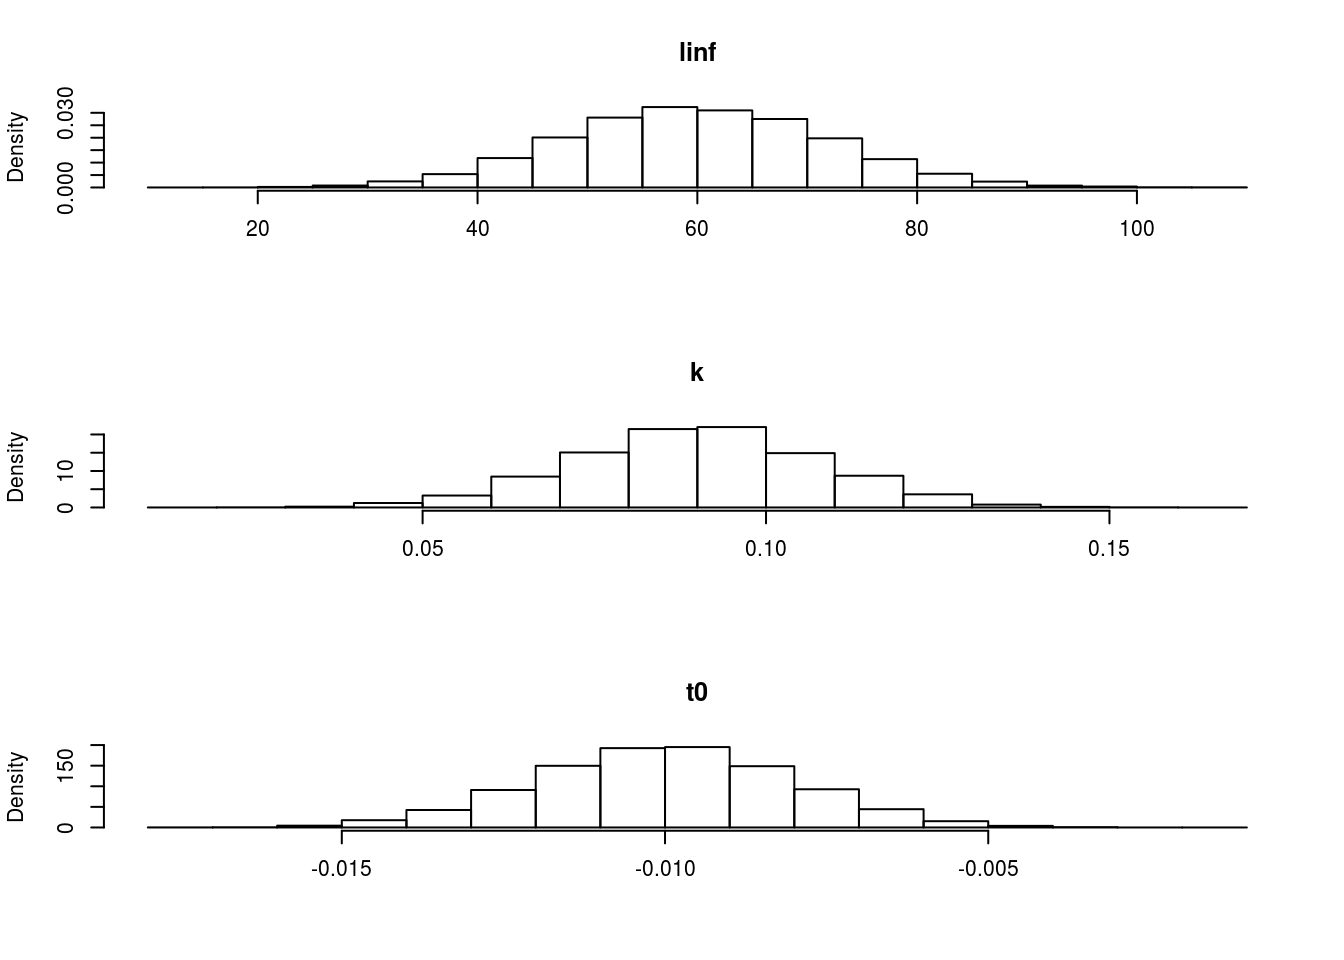 The marginal distributions of each of the parameters when using a multivariate normal distribution.